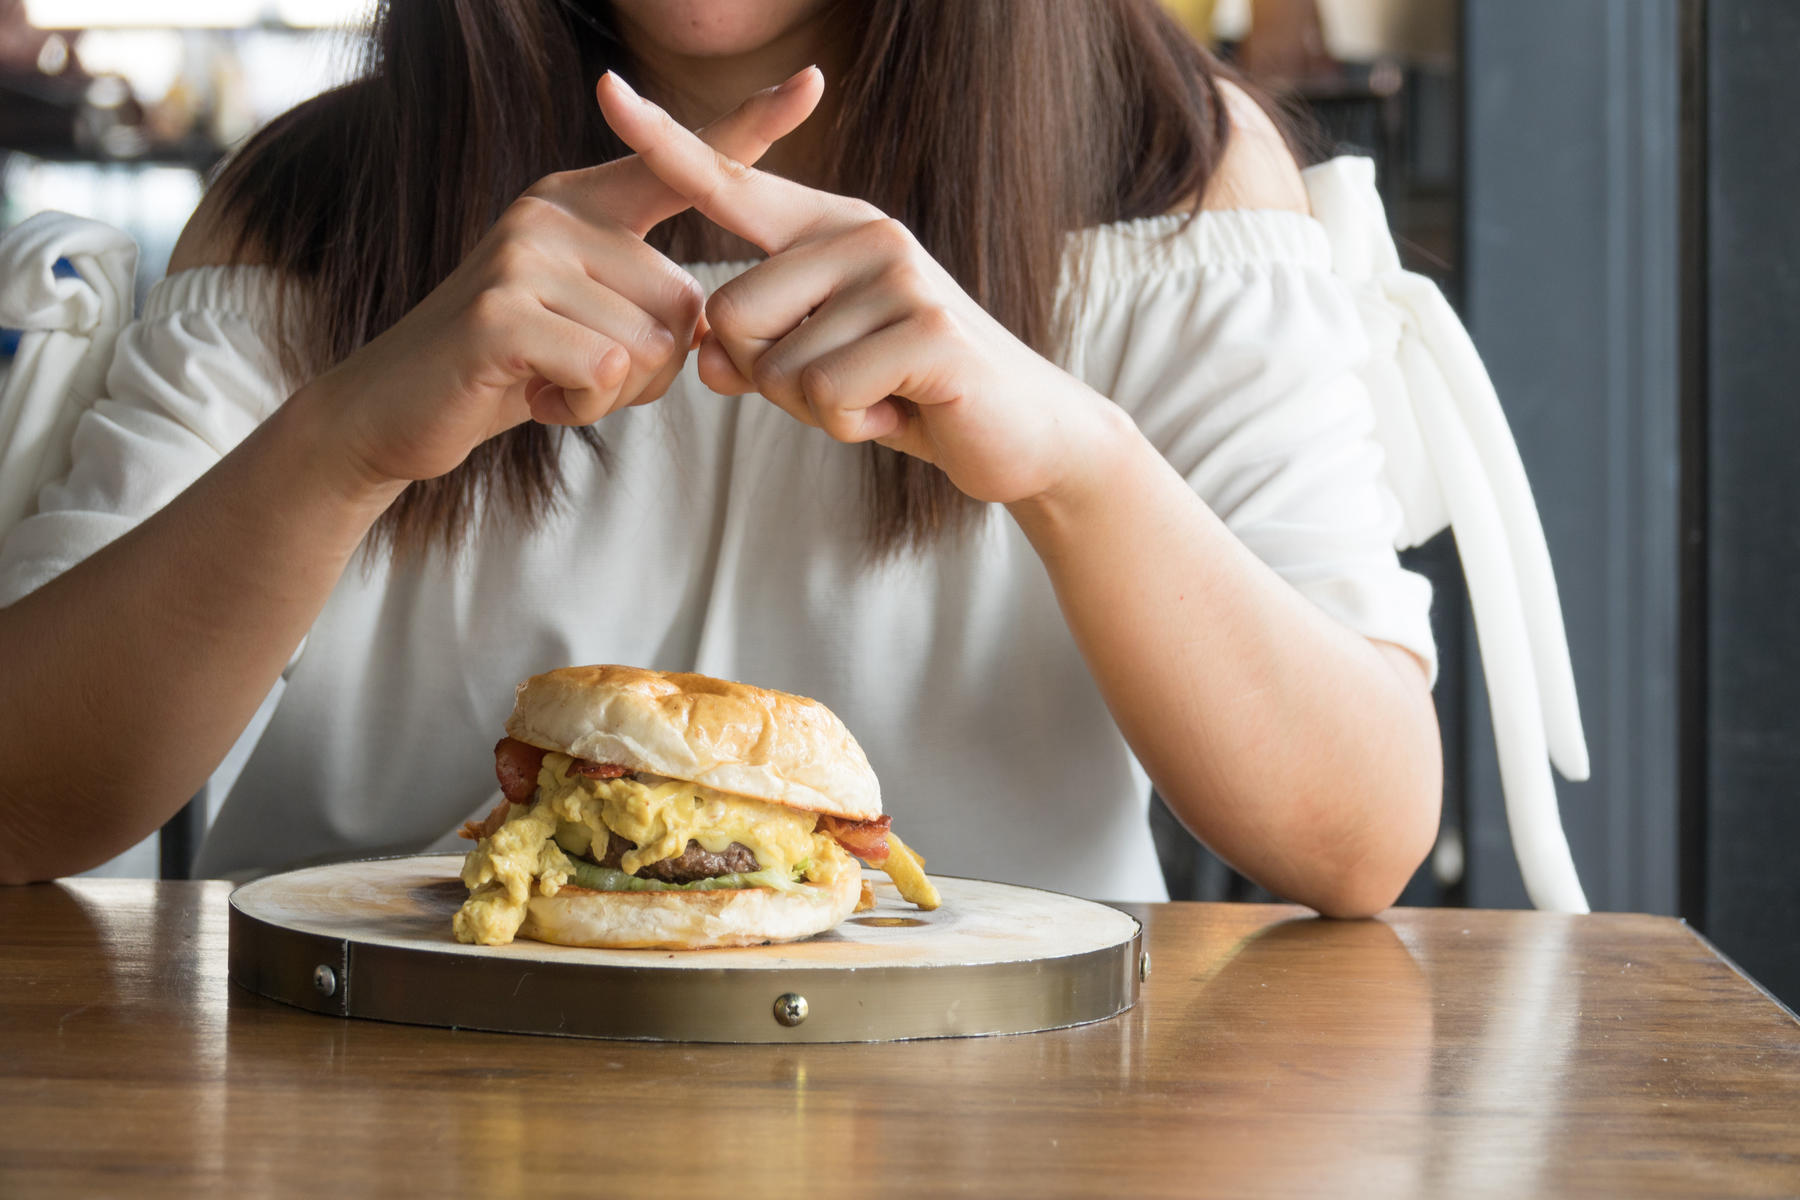 Infertility And Other Health Issues Have Been Linked to A Chemical Present in Burgers and Tacos